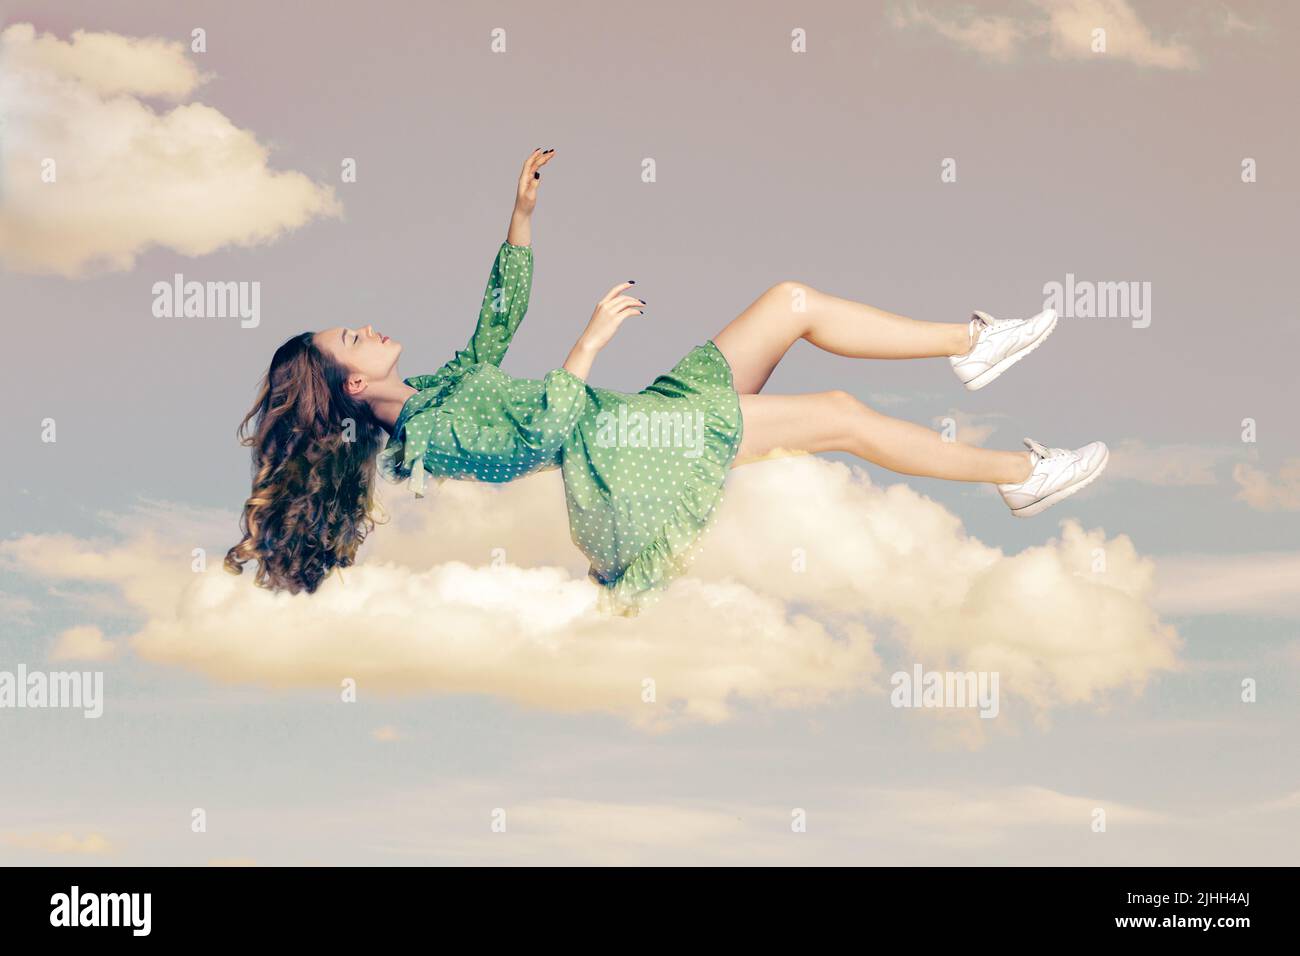 Floating in air. Relaxed girl in vintage ruffle dress levitating keeping eyes closed, sleeping while flying mid-air having comfortable peaceful dream in sky. collage composition on day cloudy blue sky Stock Photo